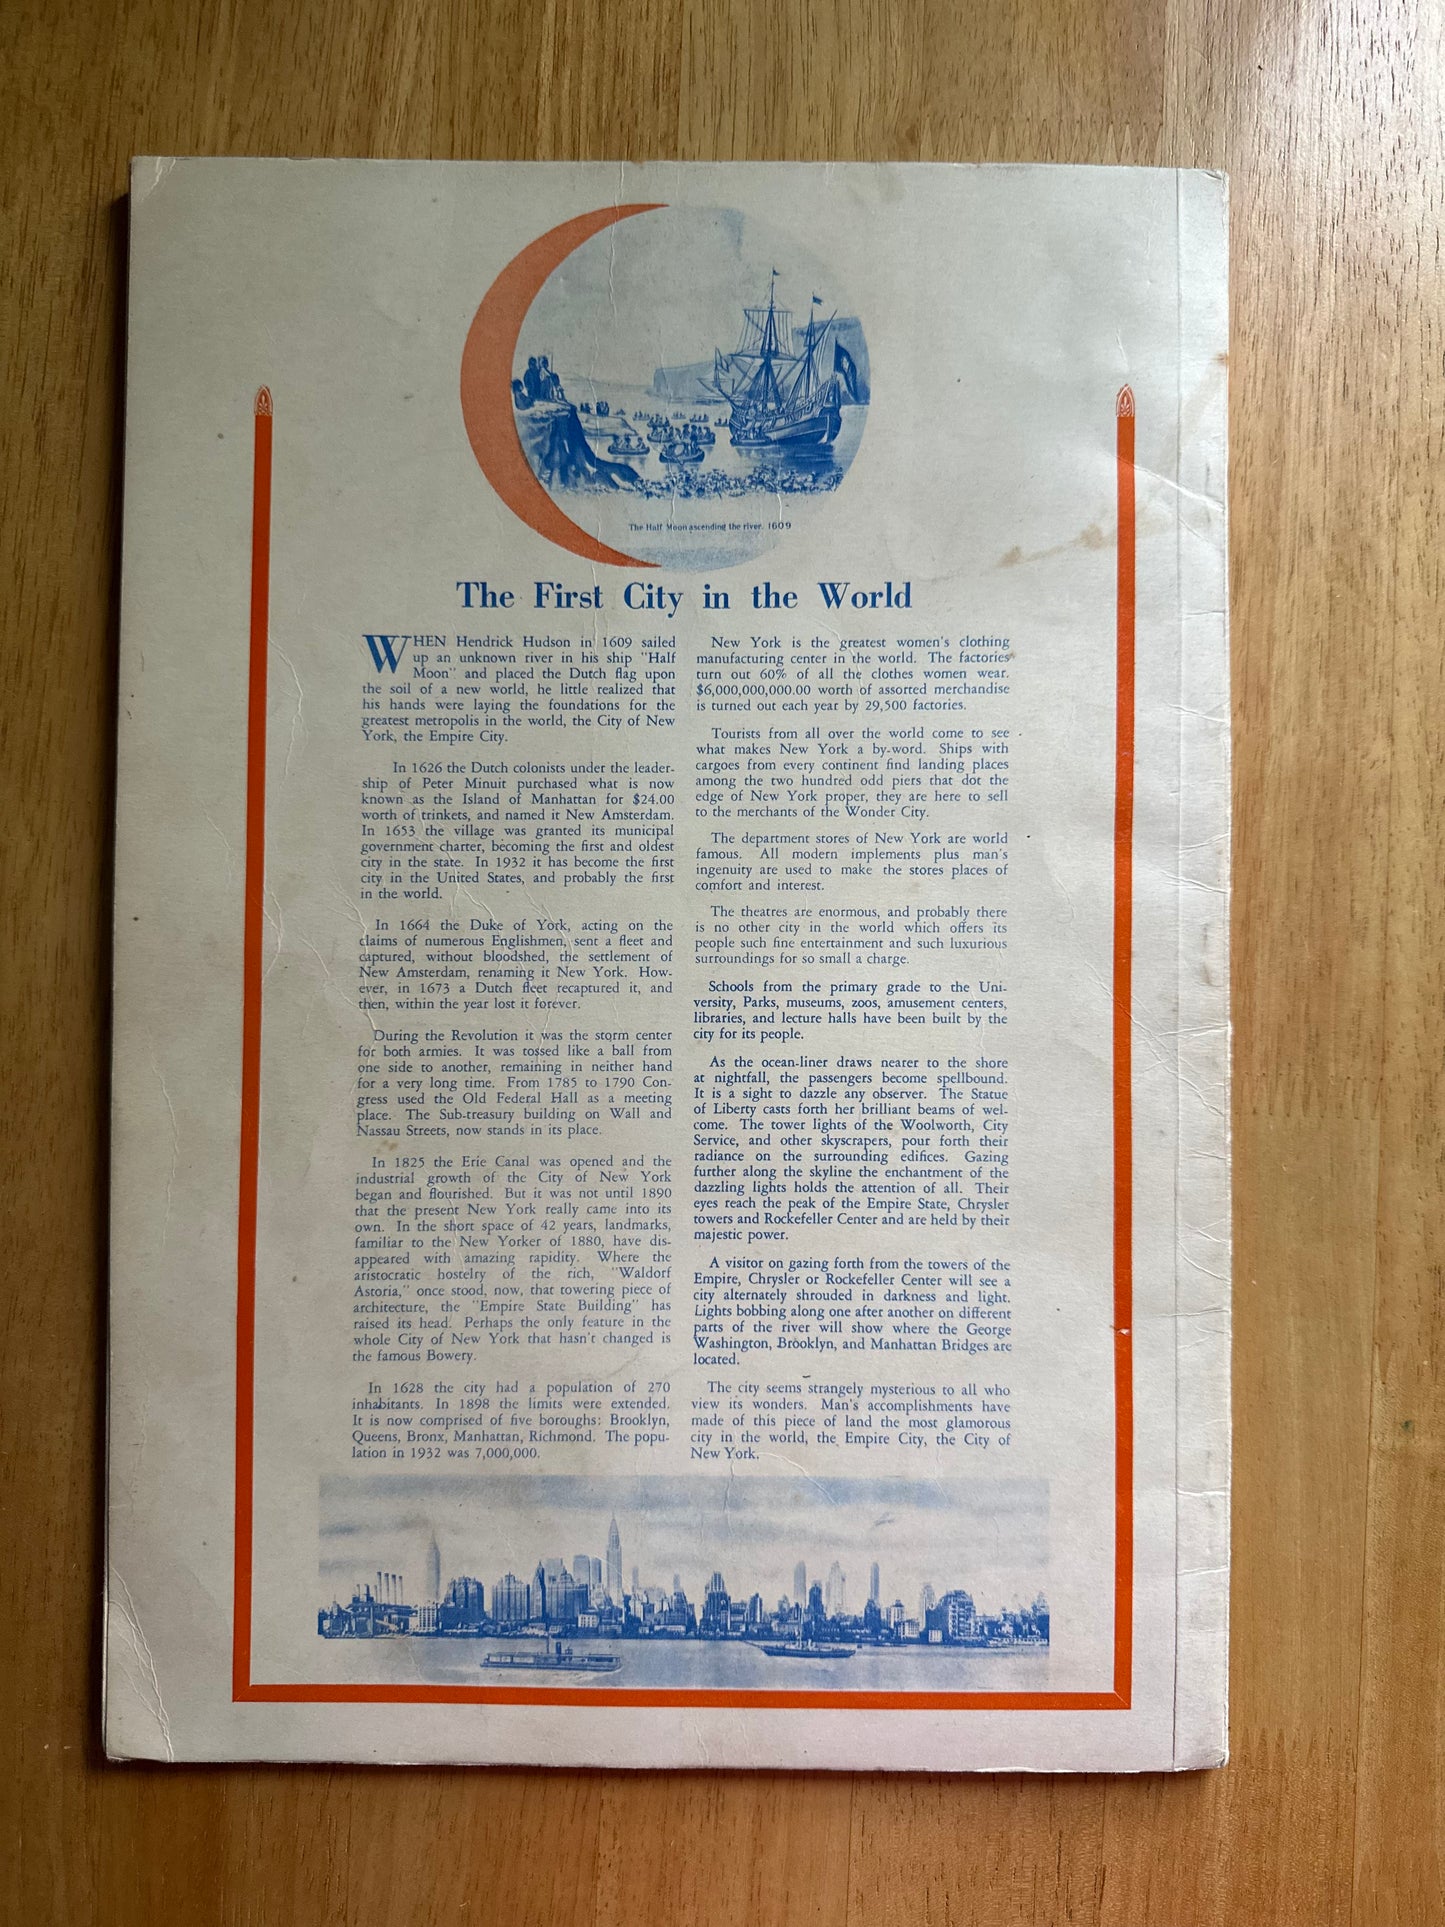 1943*RARE* King’s Views Of New York The Wonder City Of The World